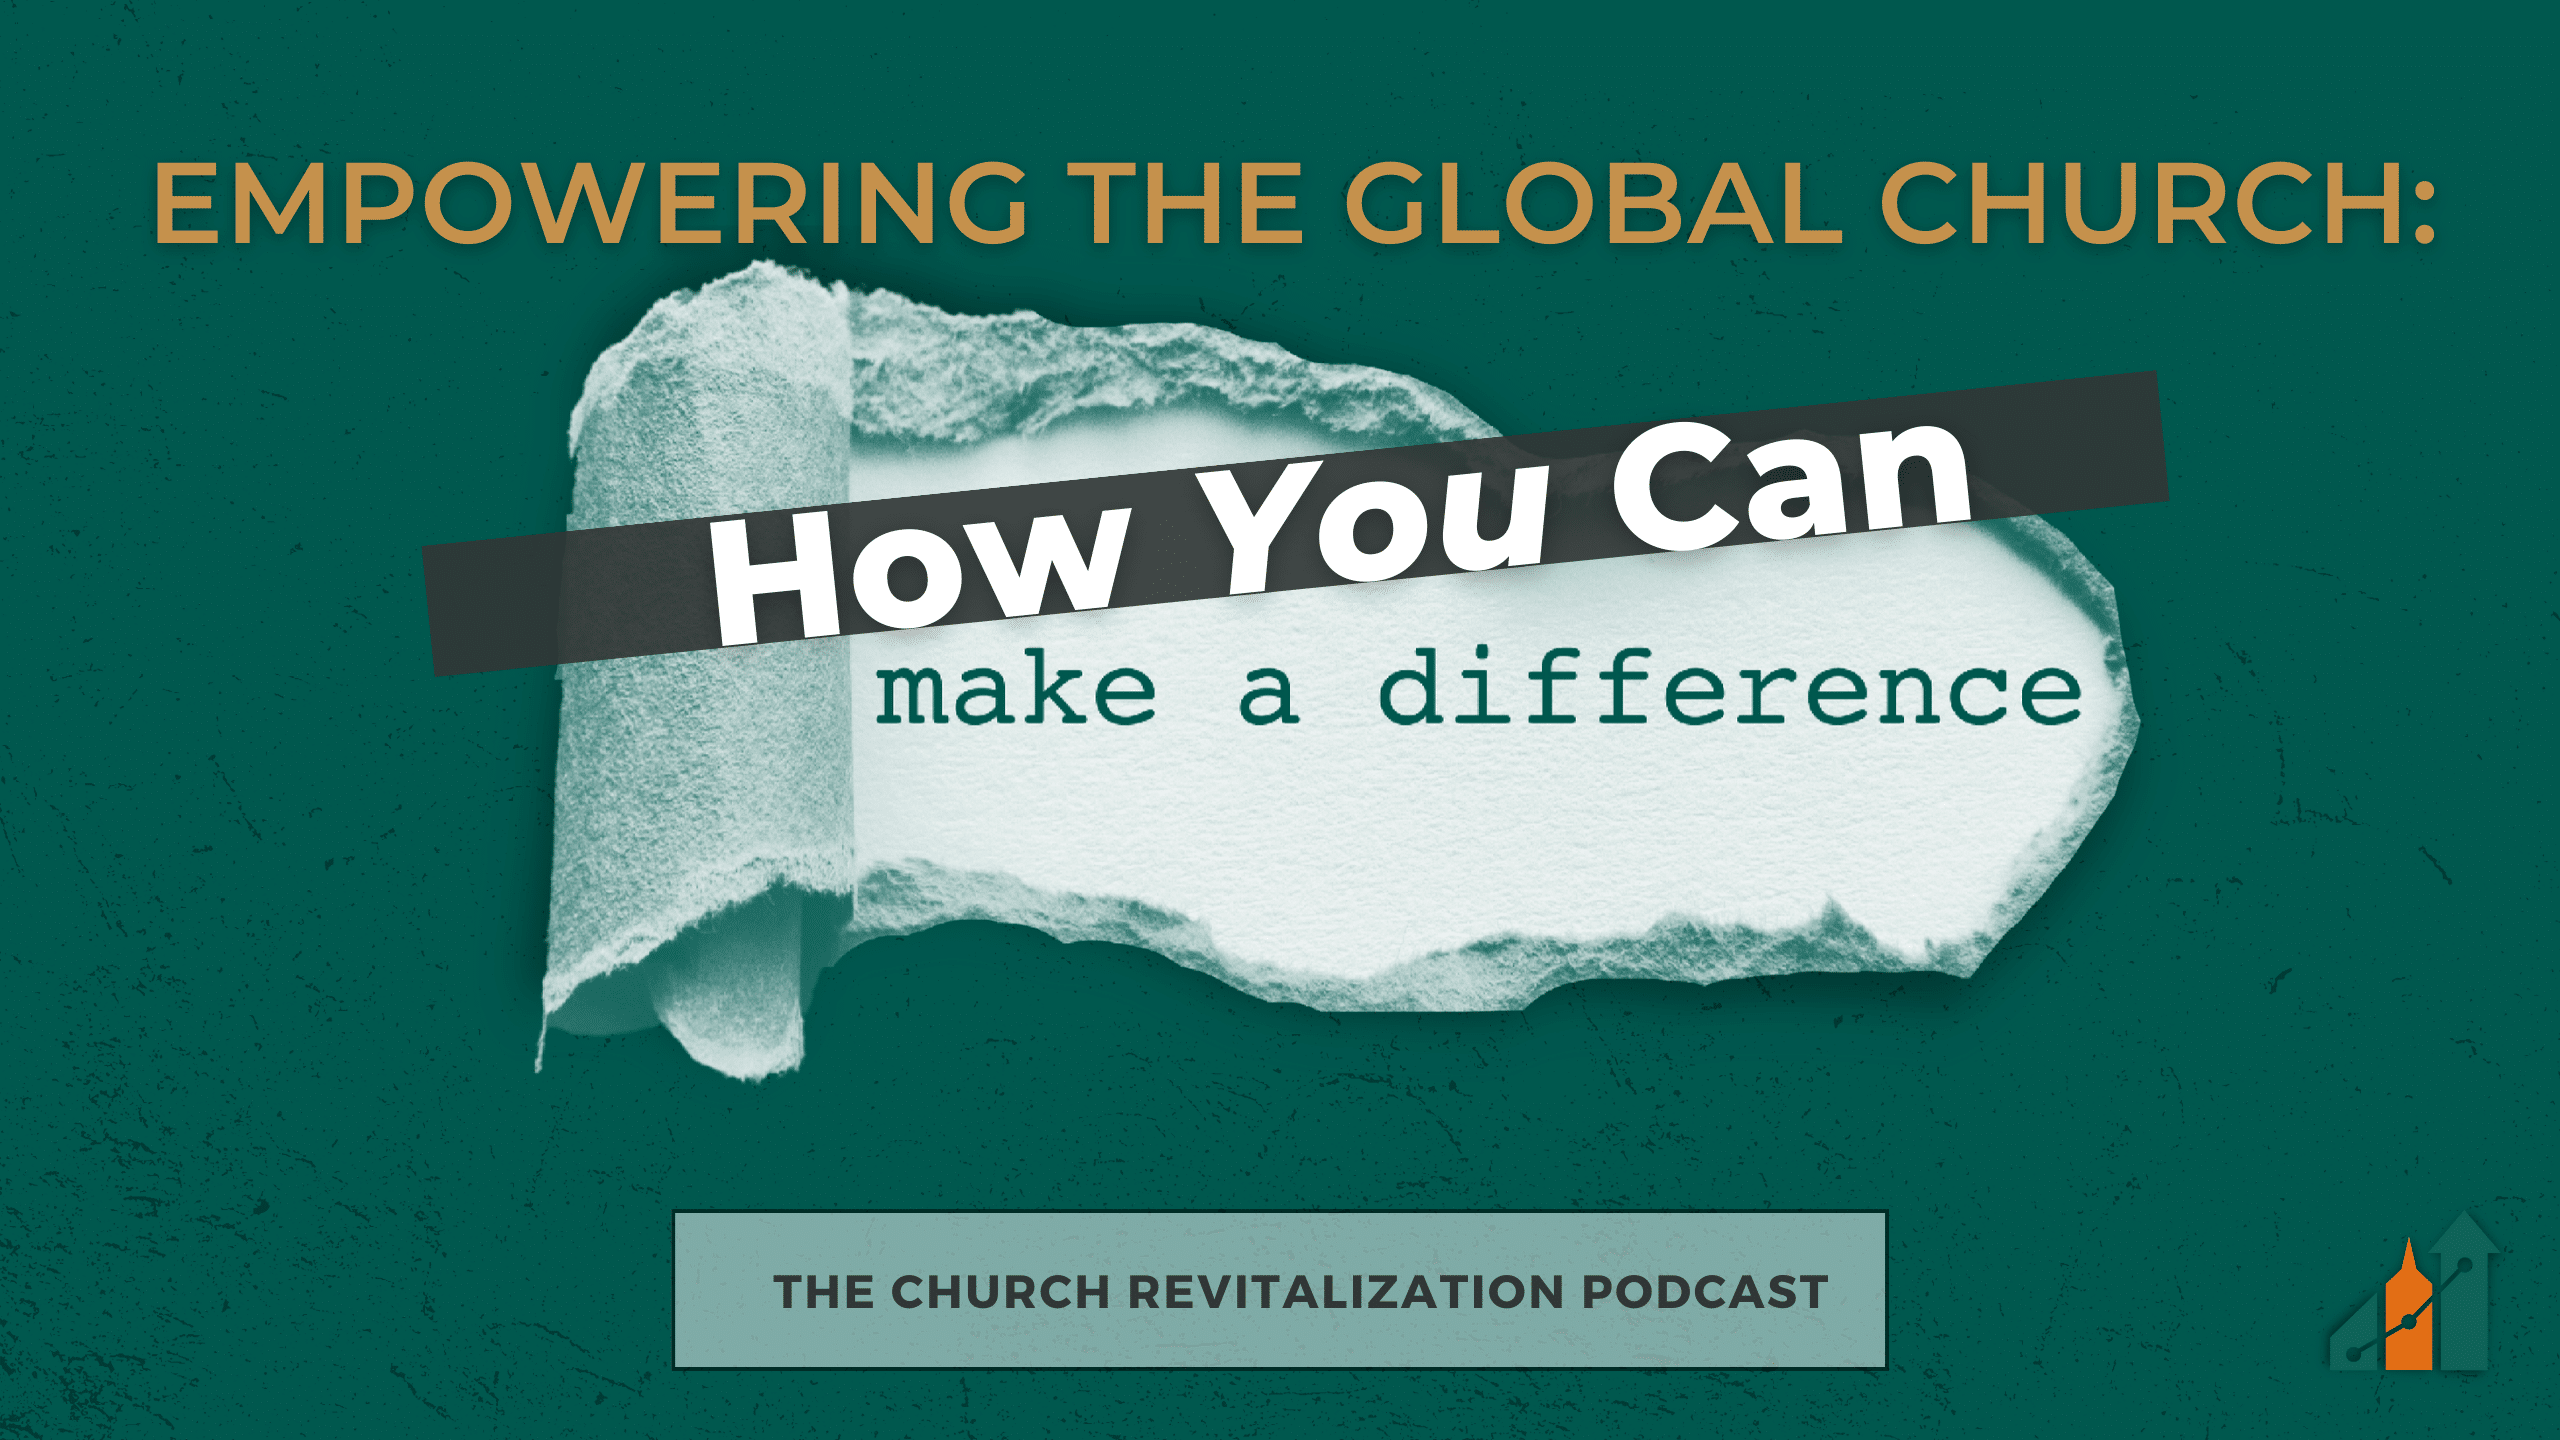 Empowering the Global Church: How You Can Make a Difference